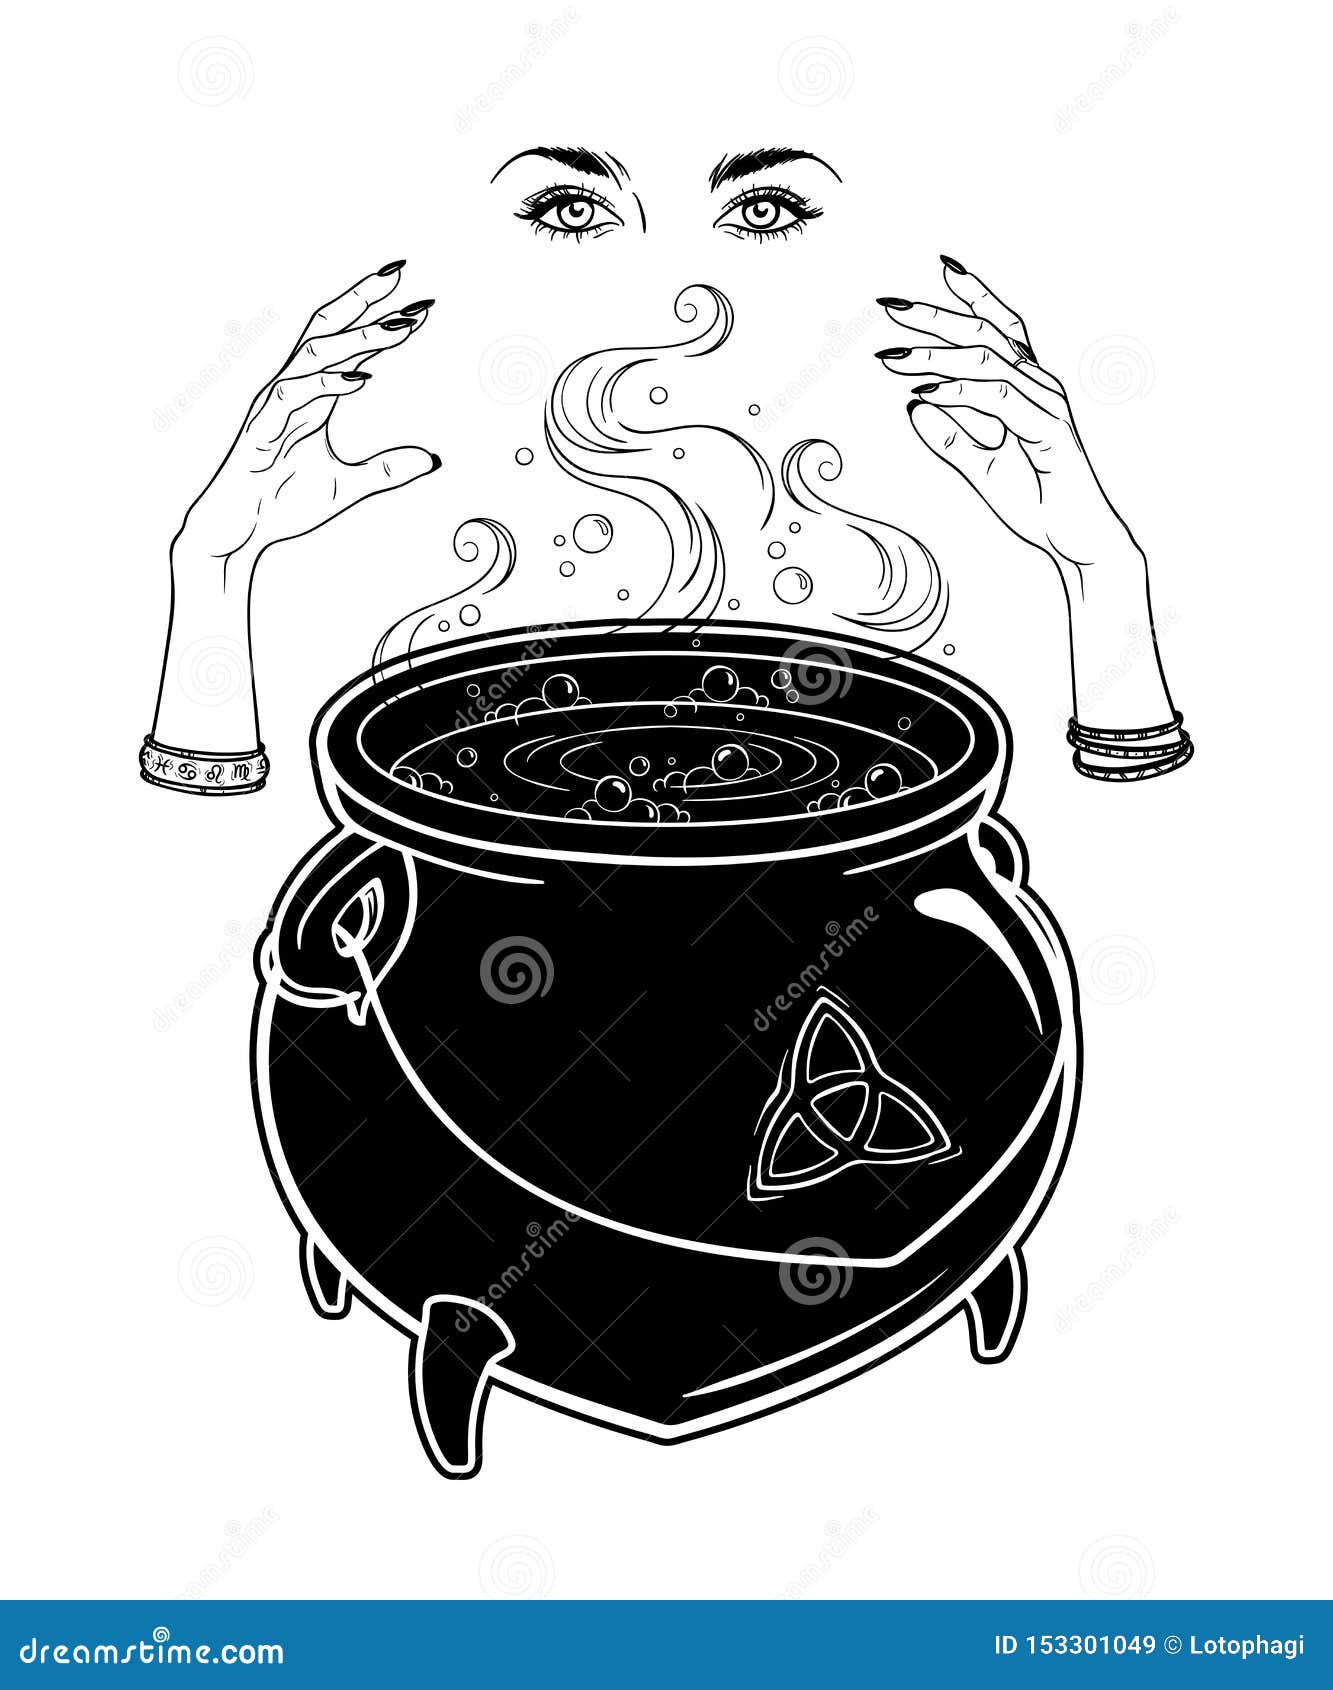 https://thumbs.dreamstime.com/z/boiling-magic-cauldron-witch-hands-cast-spell-vector-illustration-hand-drawn-wiccan-design-astrology-alchemy-symbol-153301049.jpg